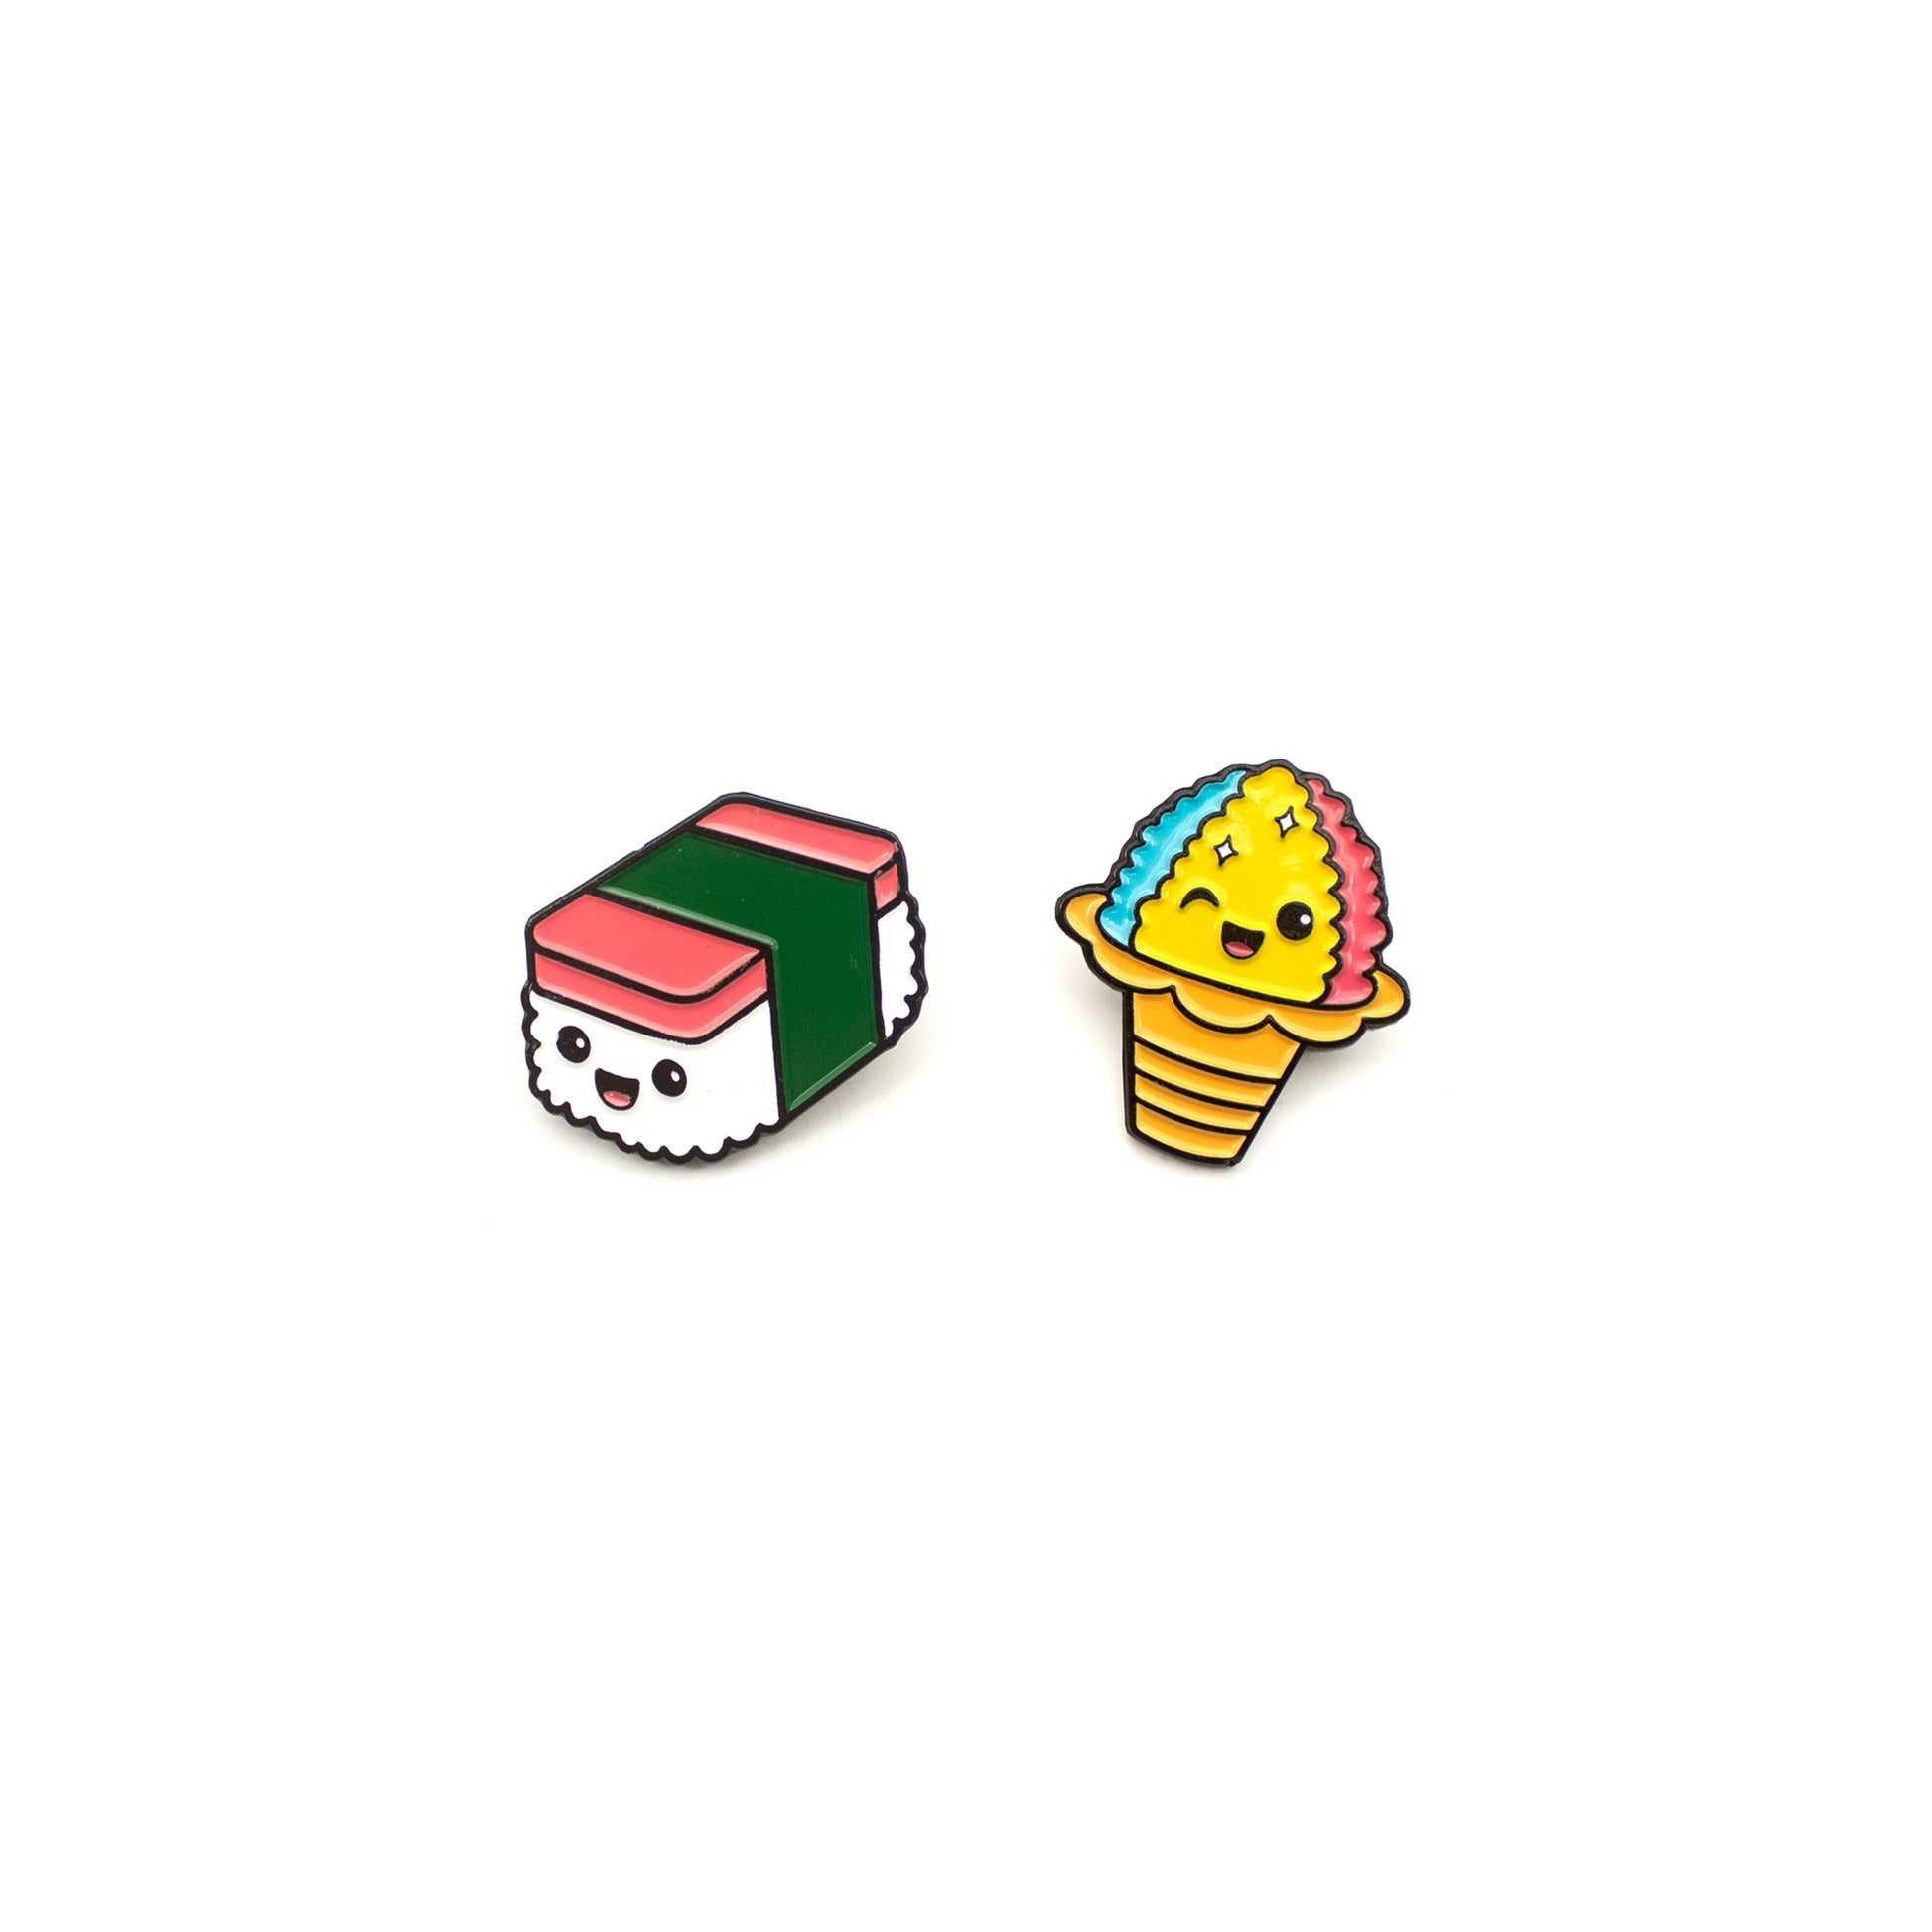 Spam Musubi and Shaved Ice enamel pins on white background